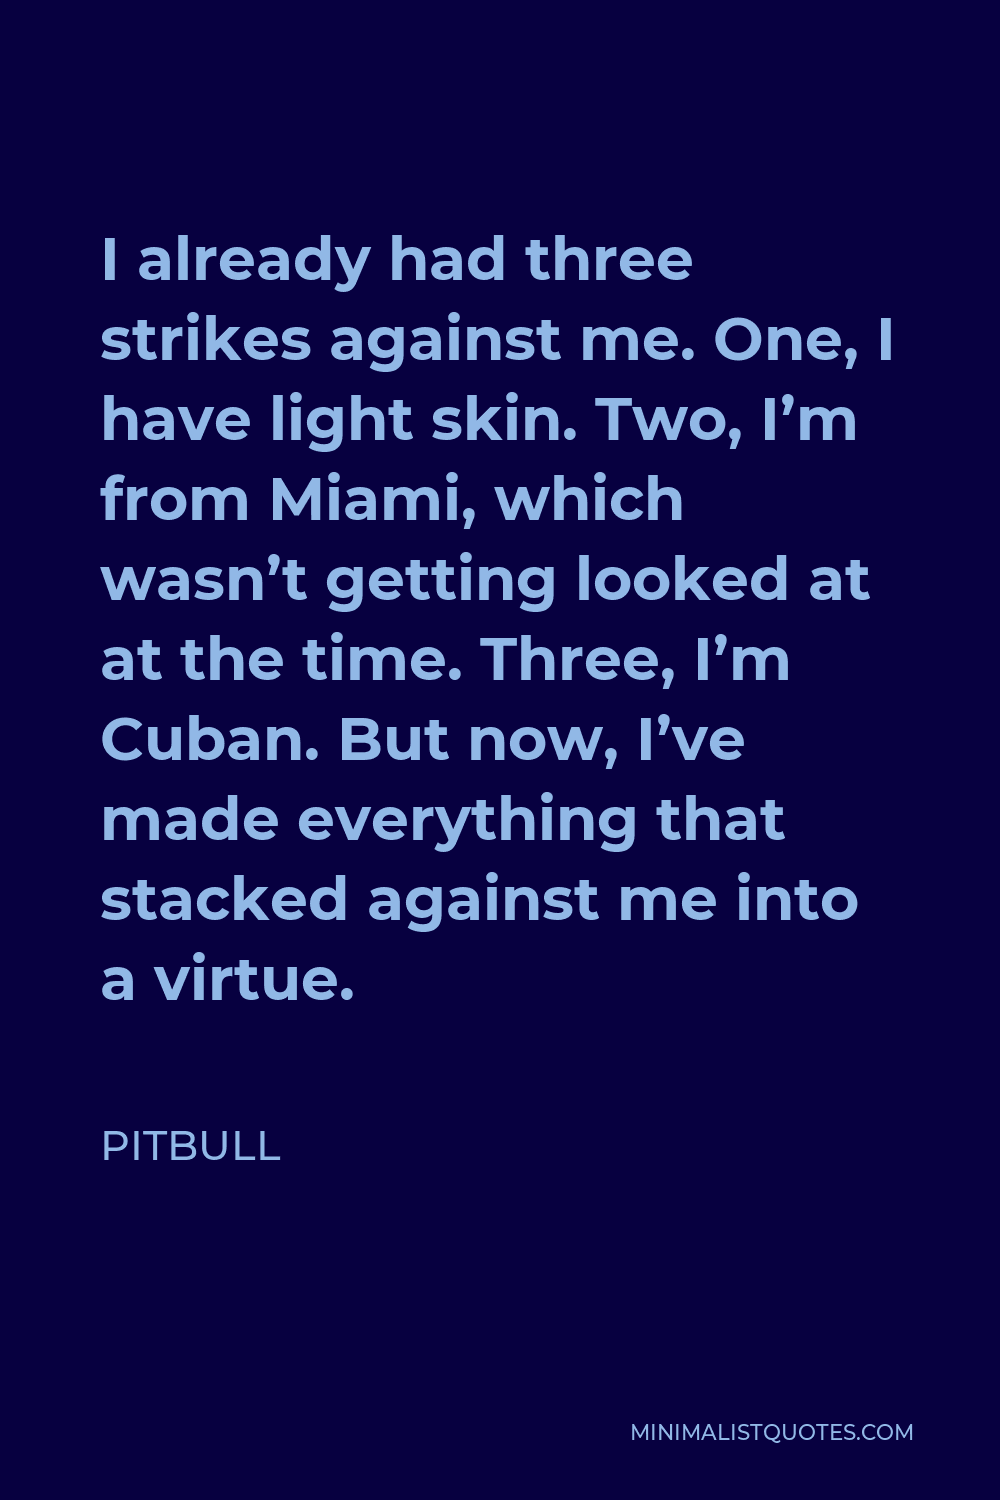 Pitbull Quote - I already had three strikes against me. One, I have light skin. Two, I’m from Miami, which wasn’t getting looked at at the time. Three, I’m Cuban. But now, I’ve made everything that stacked against me into a virtue.